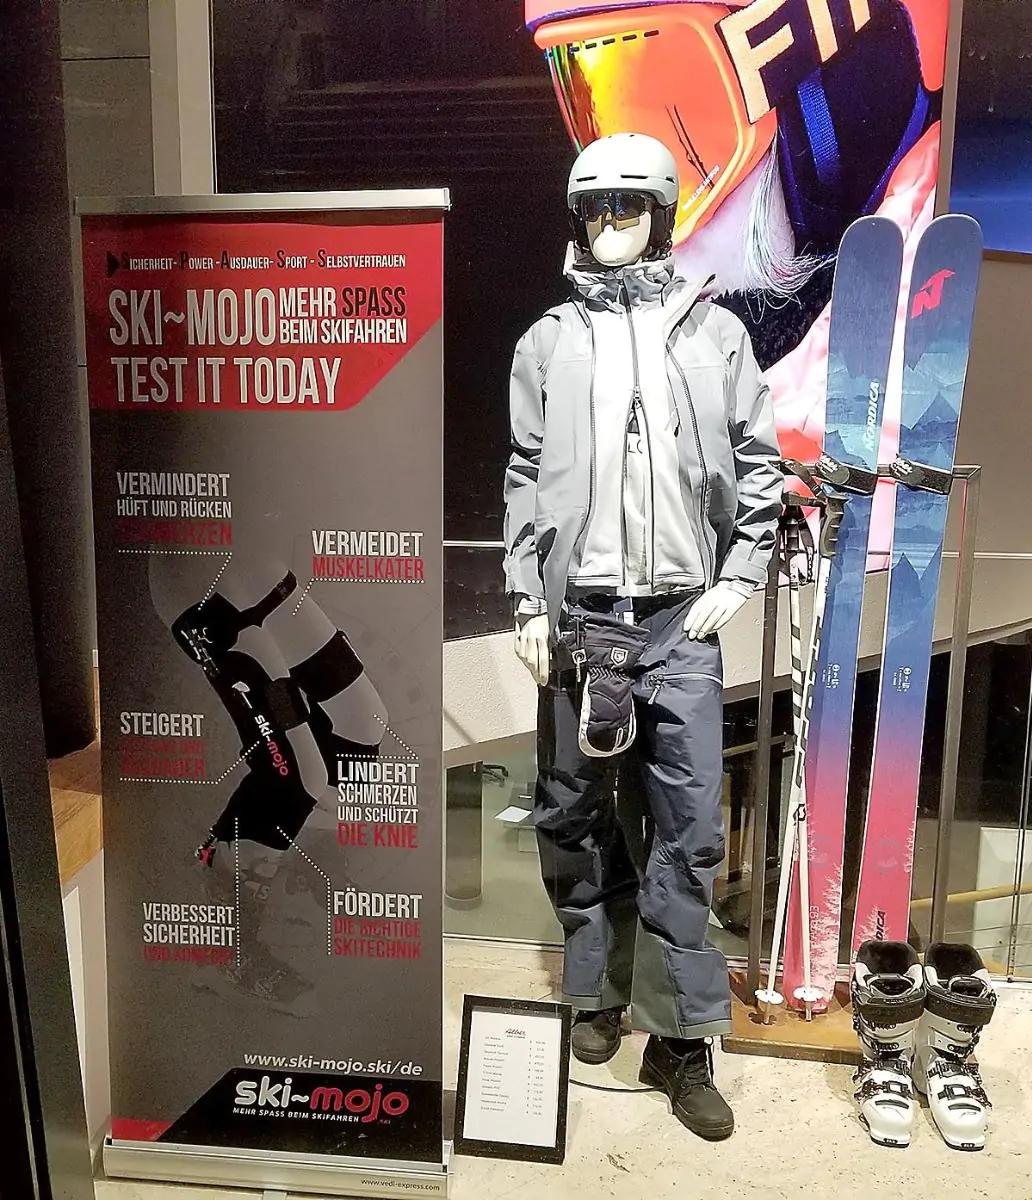 Banner on a stand with ski supply info, a manikin in a ski outfit standing next to the sign and skis